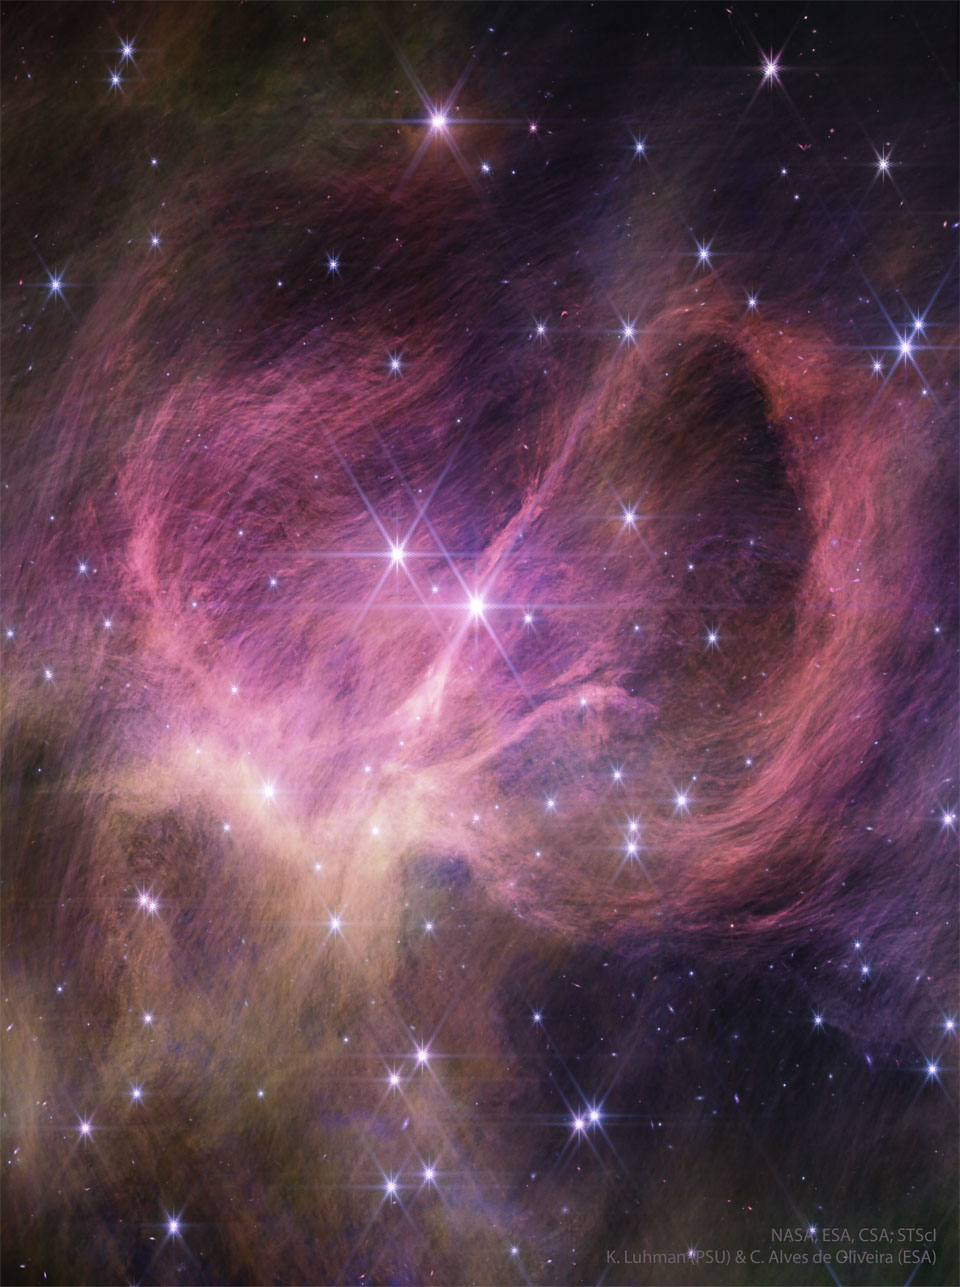 A cluster of stars is shown along with surrounding nebular gas a
and dust. Shown in infrared light in pink, the dust winds around the 
nebula centre and itself appears composed of many finer filaments.
Please see the explanation for more detailed information.